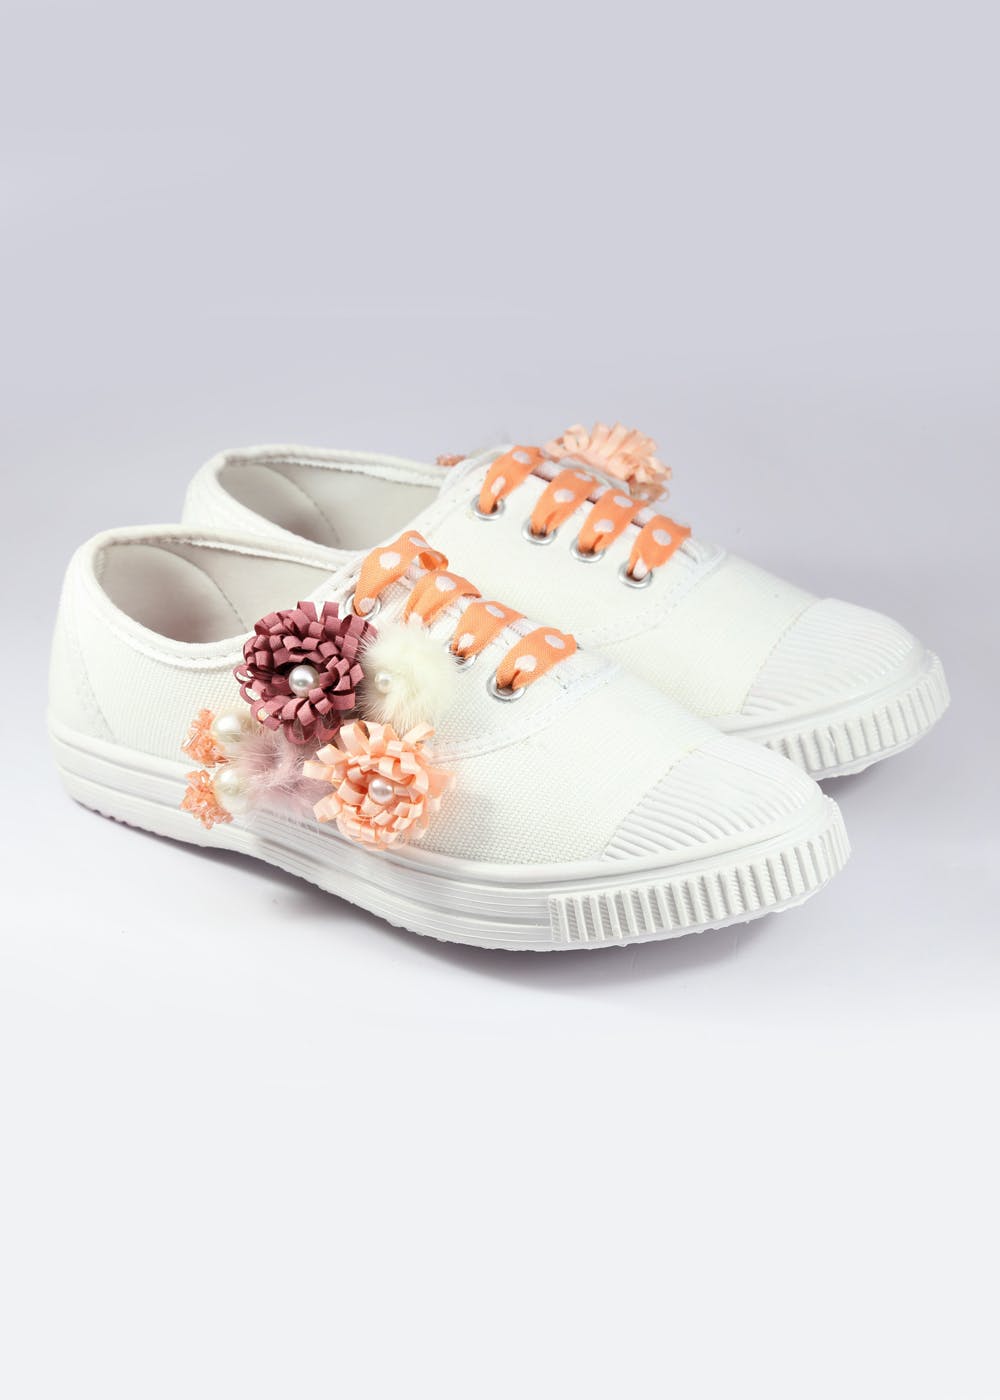 embellished white sneakers